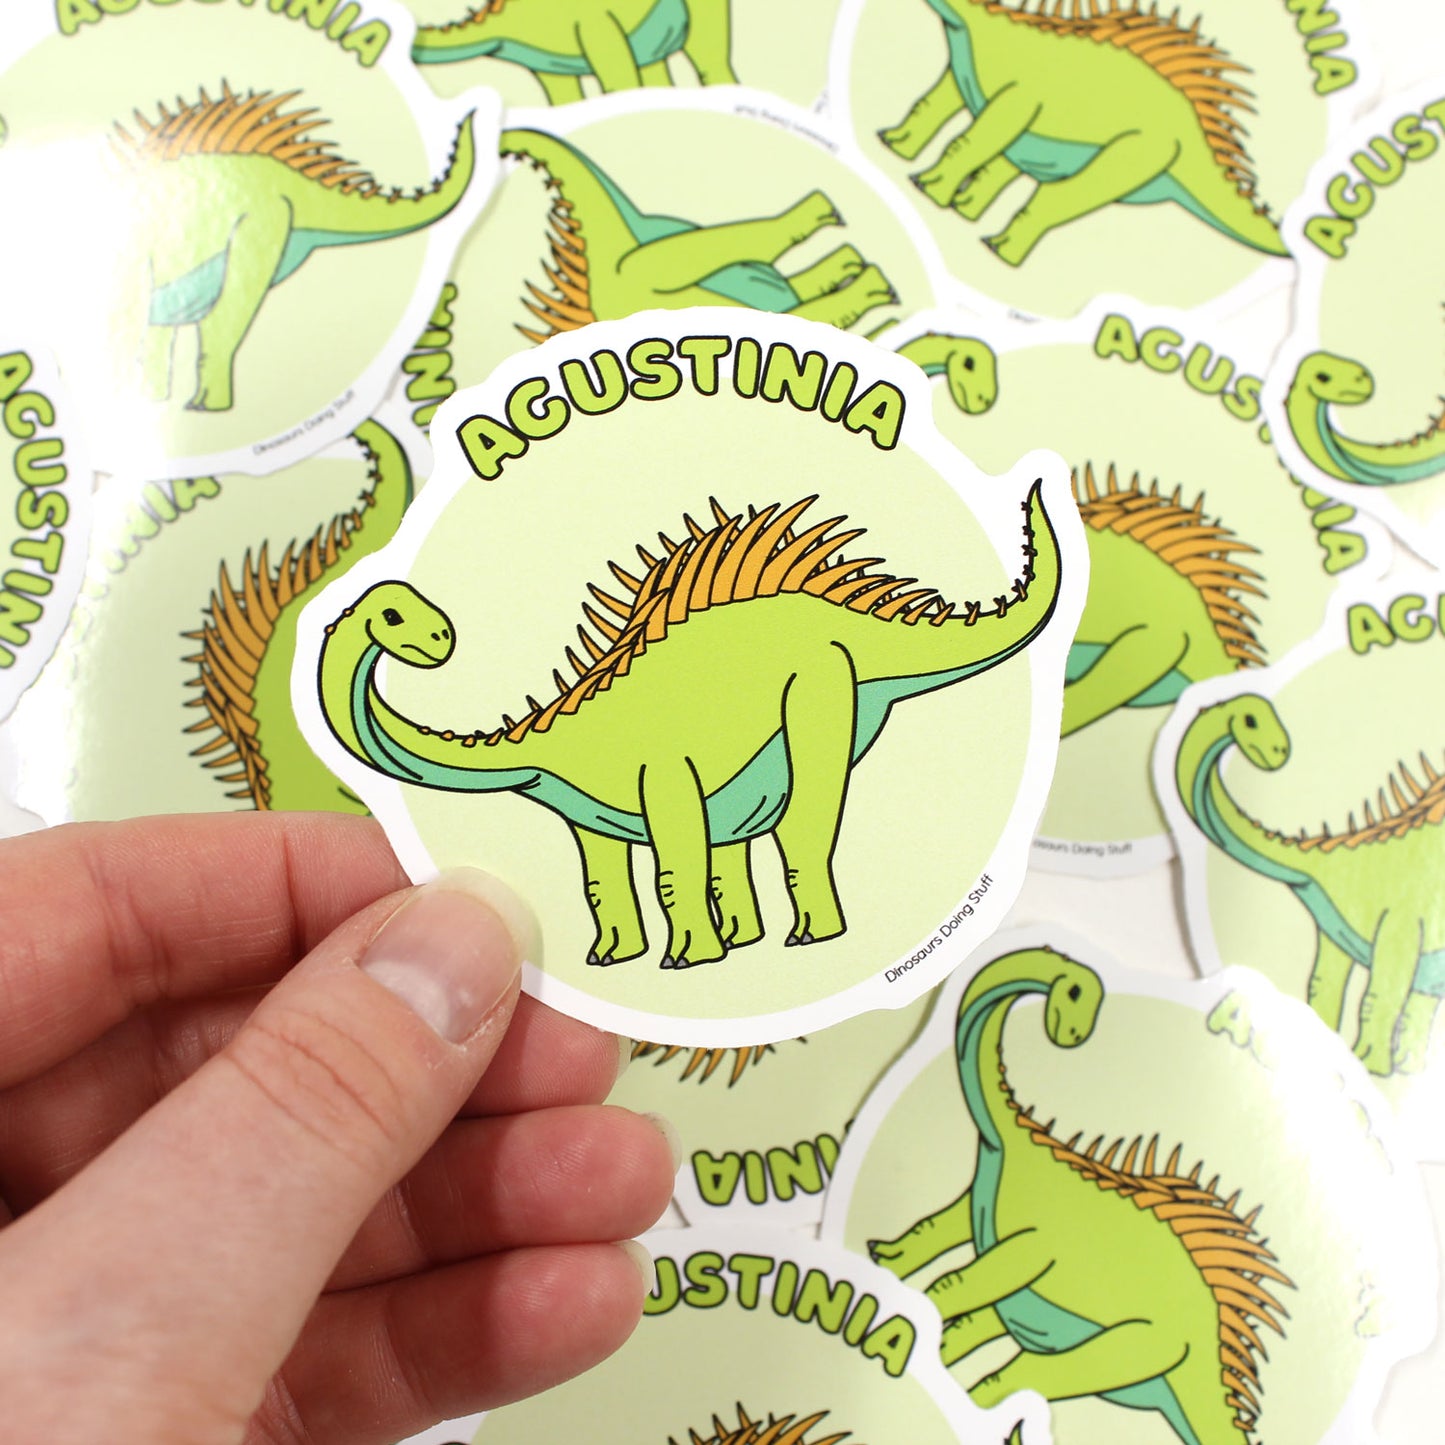 Agustinia dinosaur sticker held by a hand with scattered stickers behind it